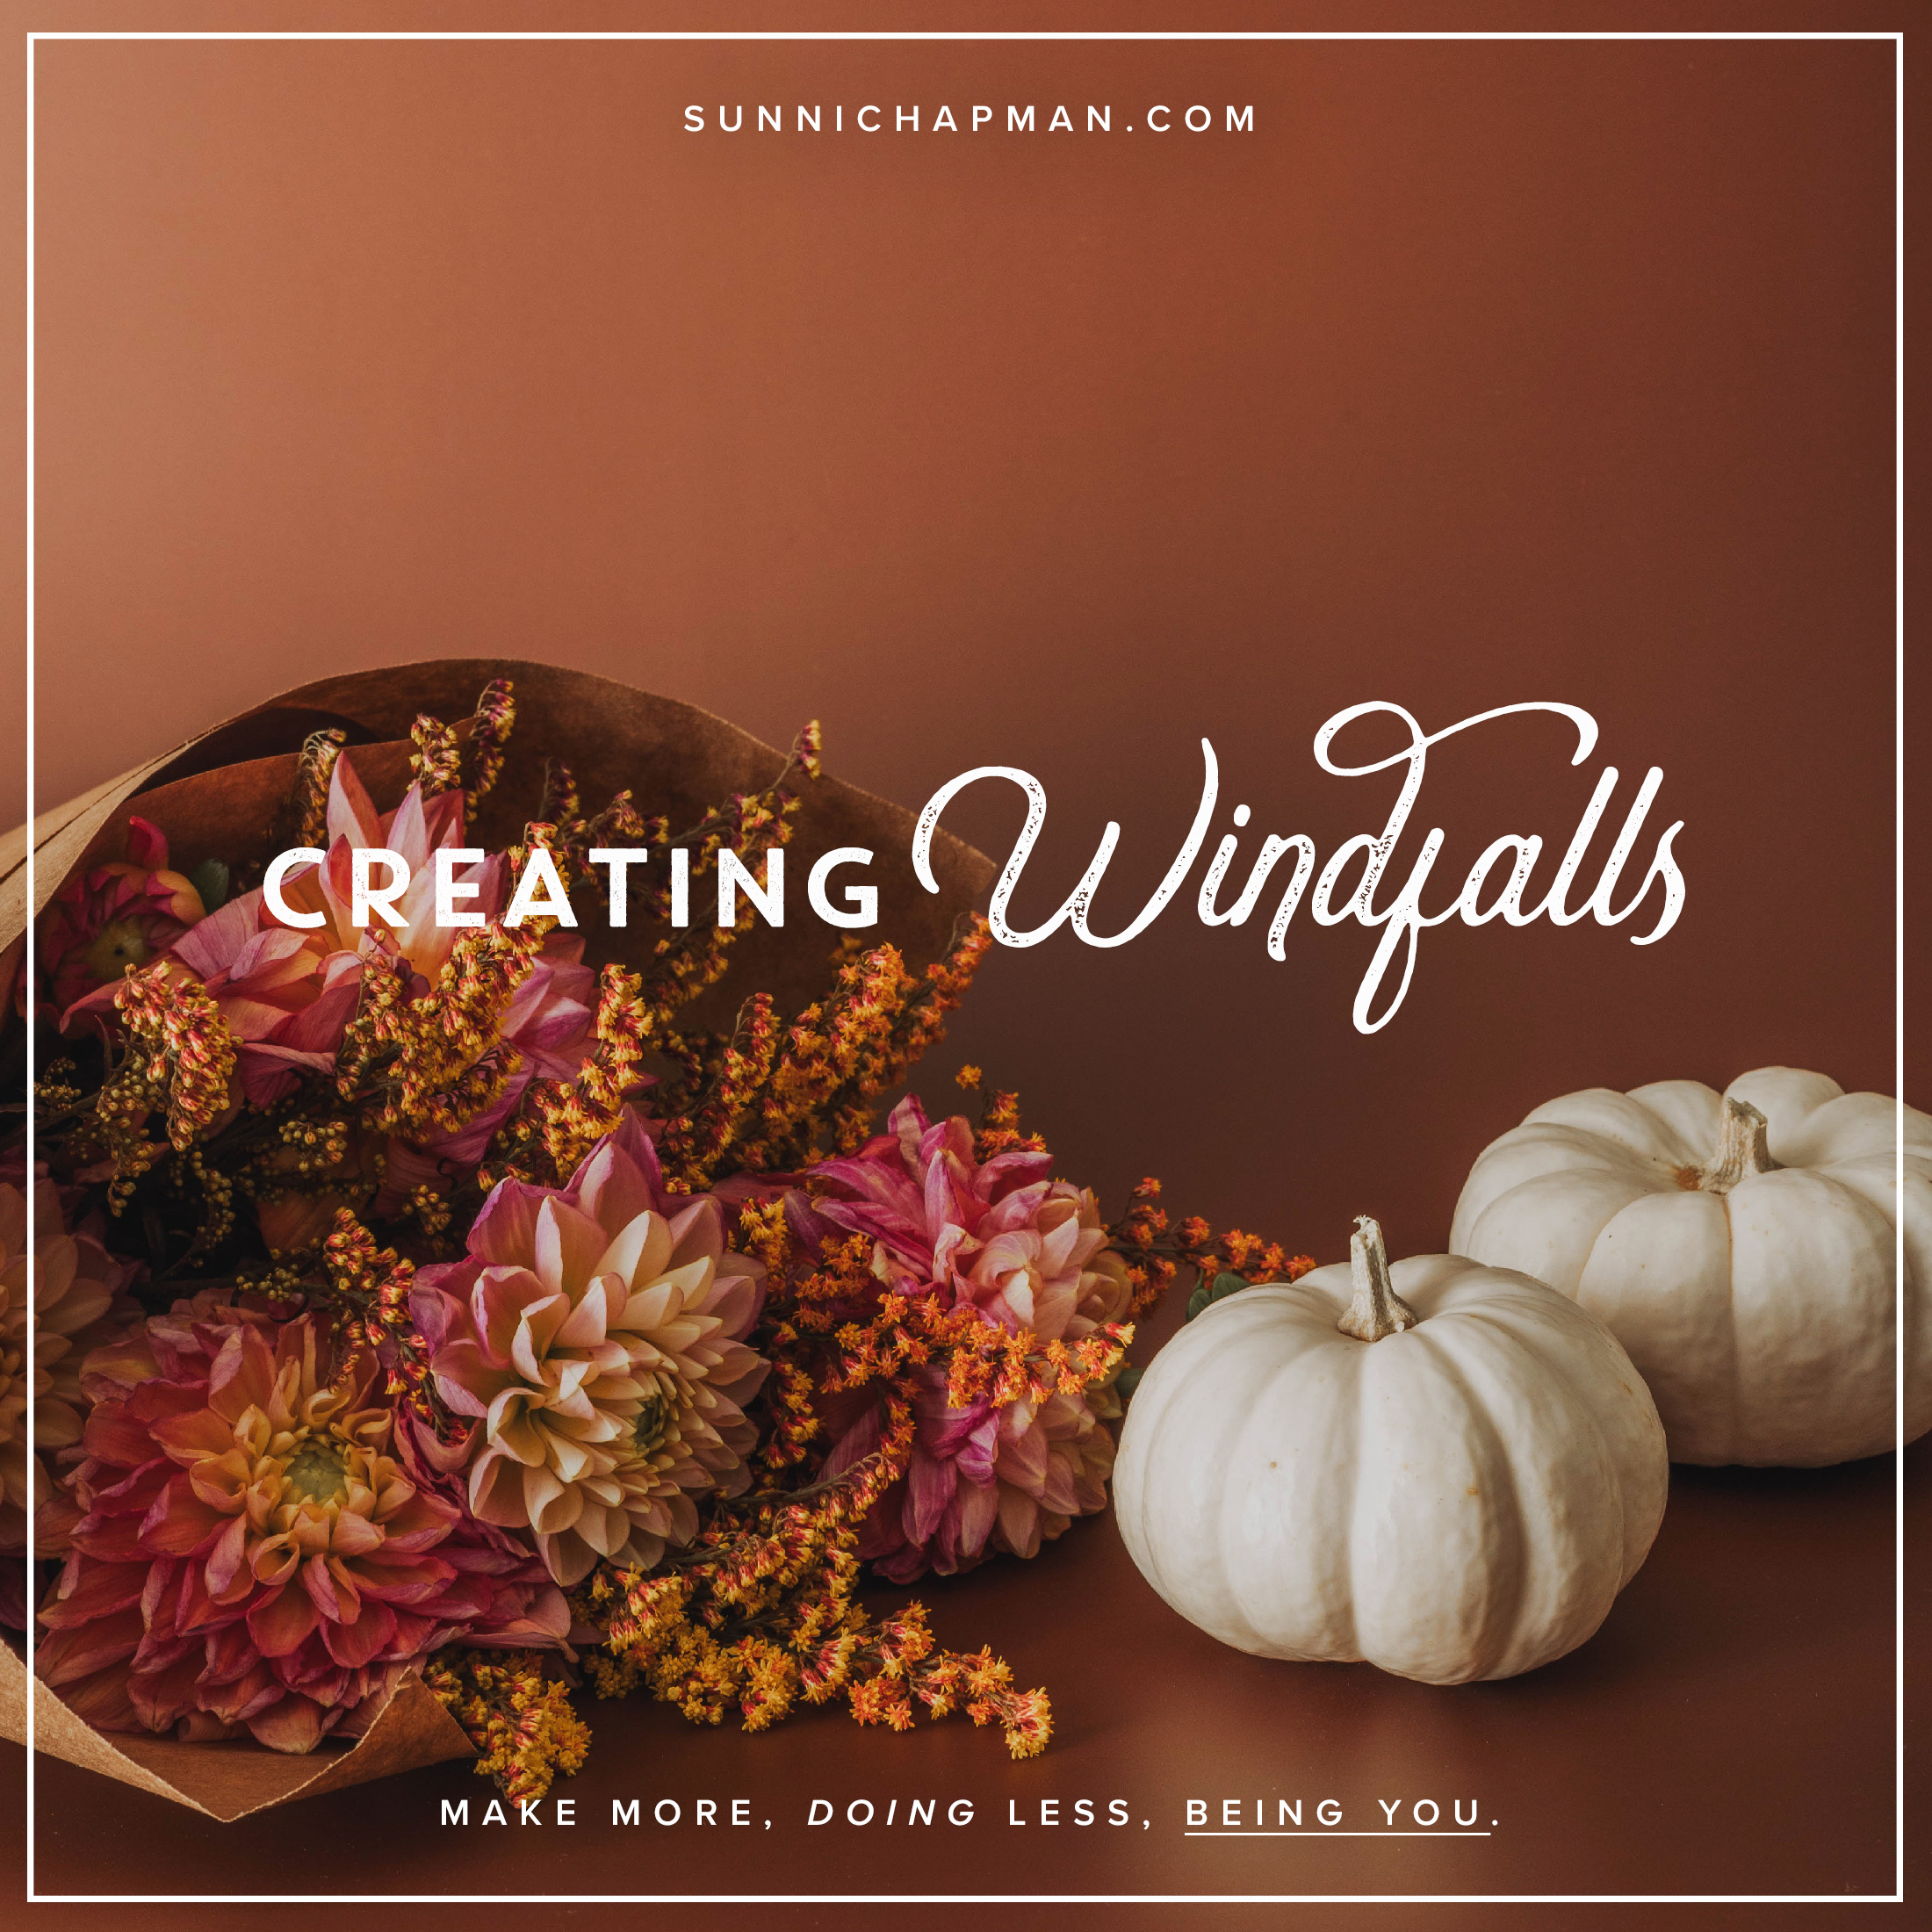 Beautiful dry flowers in varying shades of pink and orange alongside two pumpkins, with the text 'Creating Windfalls' displayed prominently.